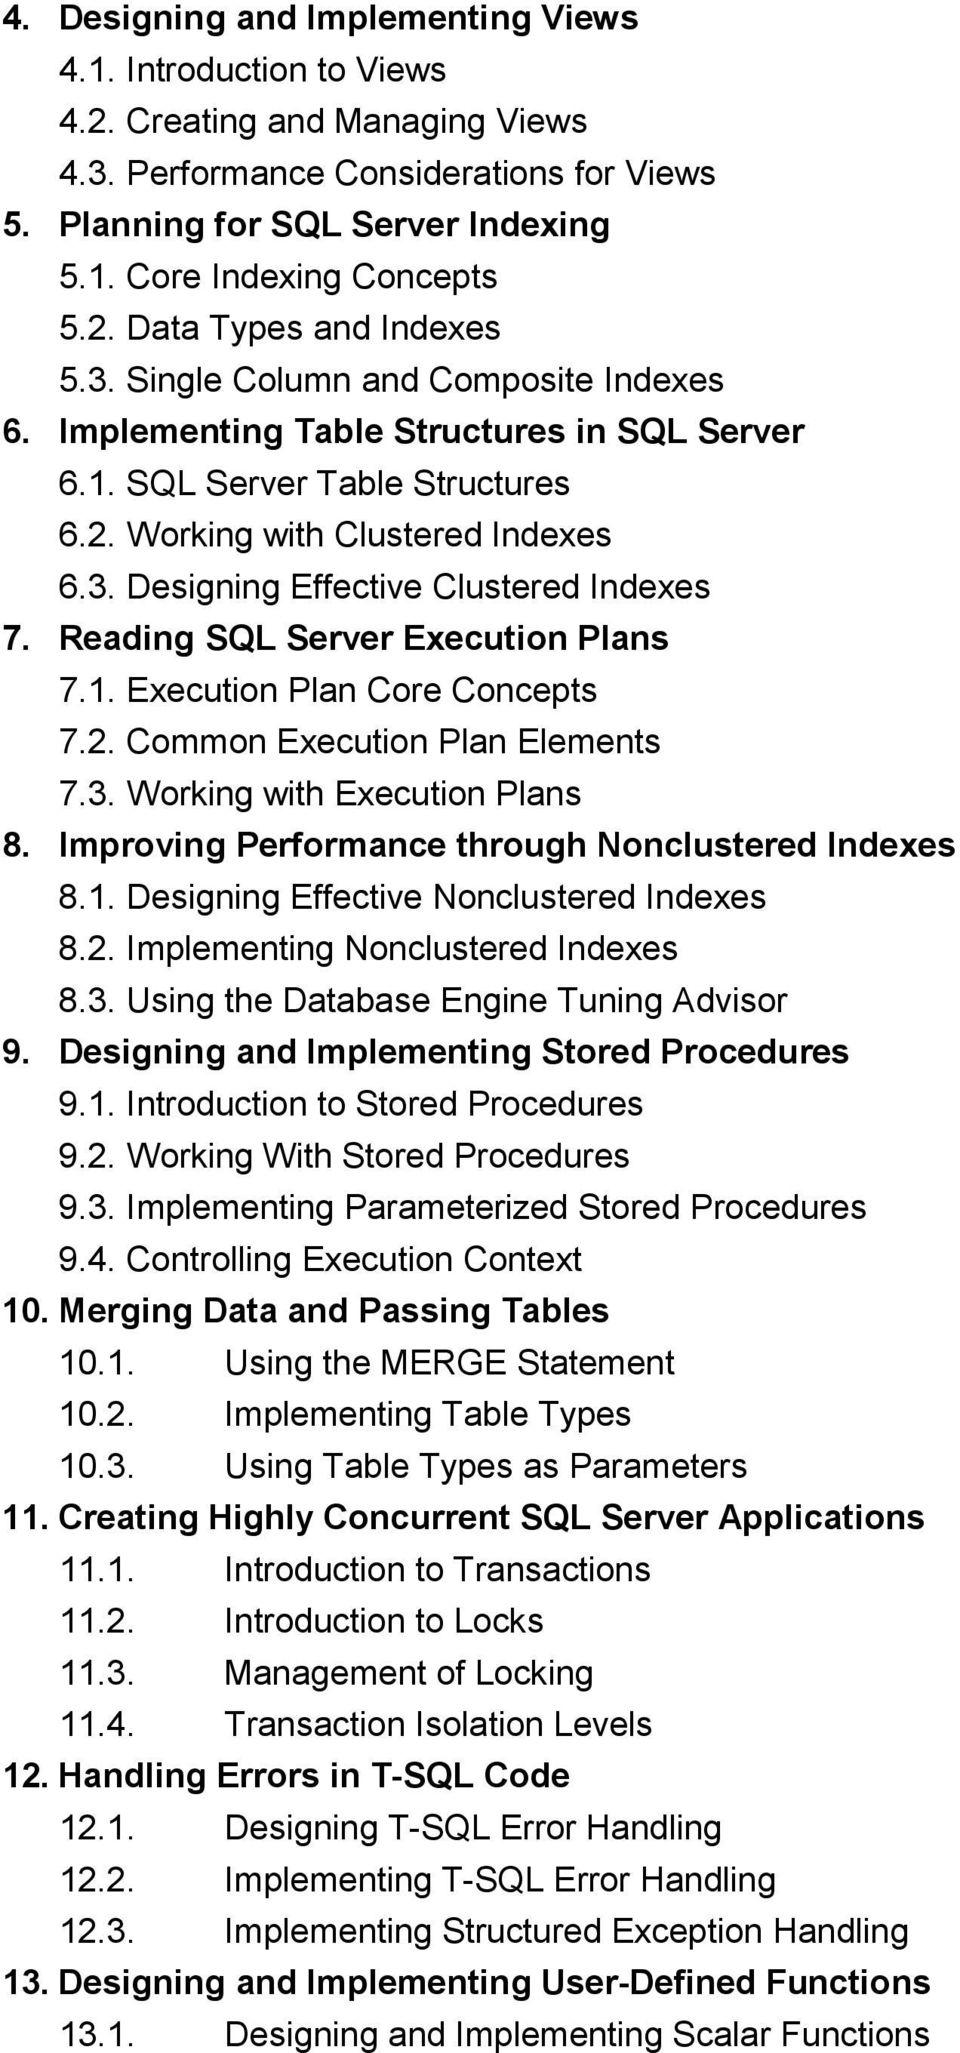 Reading SQL Server Execution Plans 7.1. Execution Plan Core Concepts 7.2. Common Execution Plan Elements 7.3. Working with Execution Plans 8. Improving Performance through Nonclustered Indexes 8.1. Designing Effective Nonclustered Indexes 8.